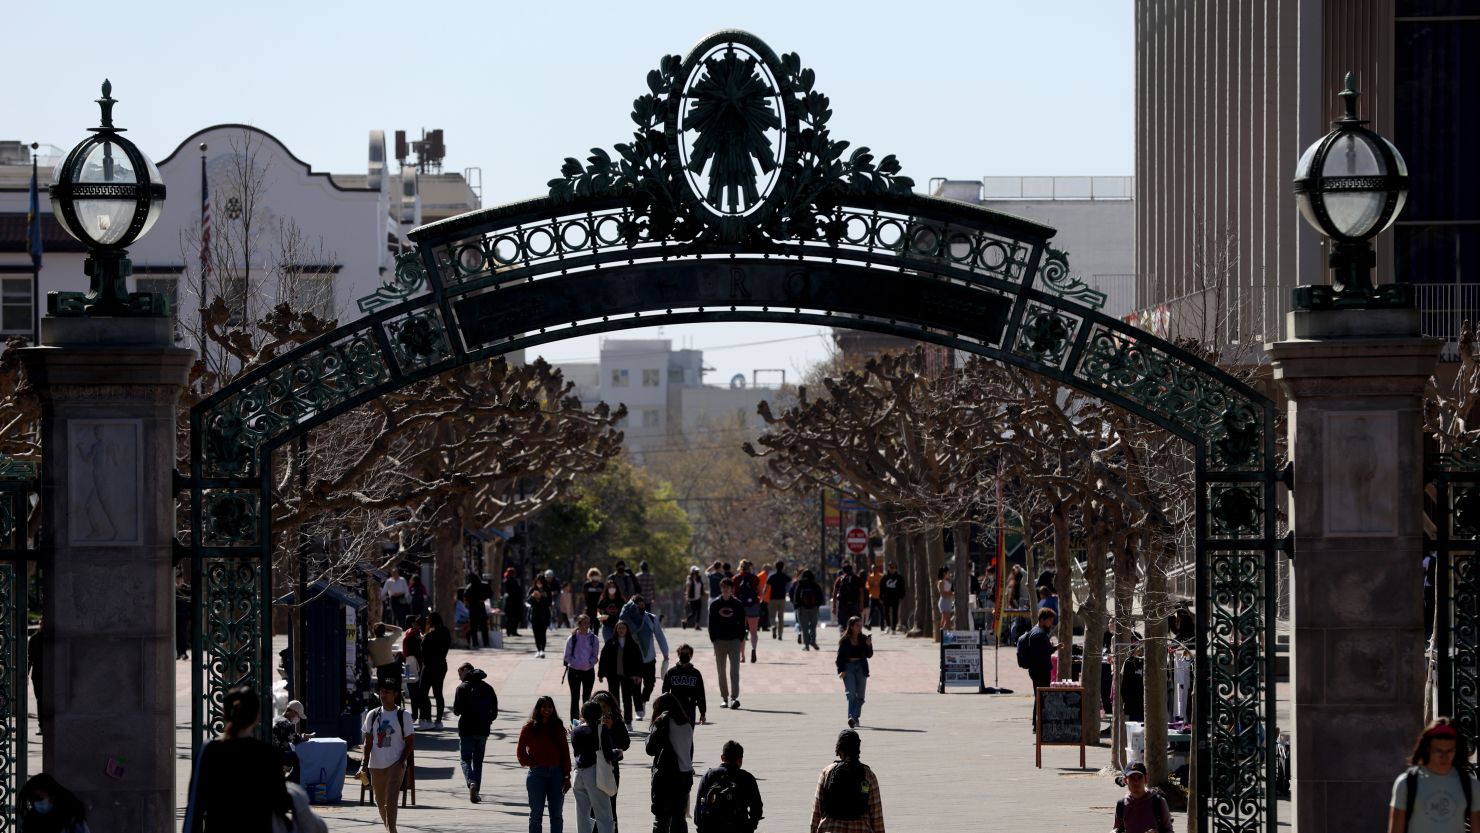 People walk through Sproul Plaza on the UC Berkeley campus on March 14, 2022 in Berkeley, California.